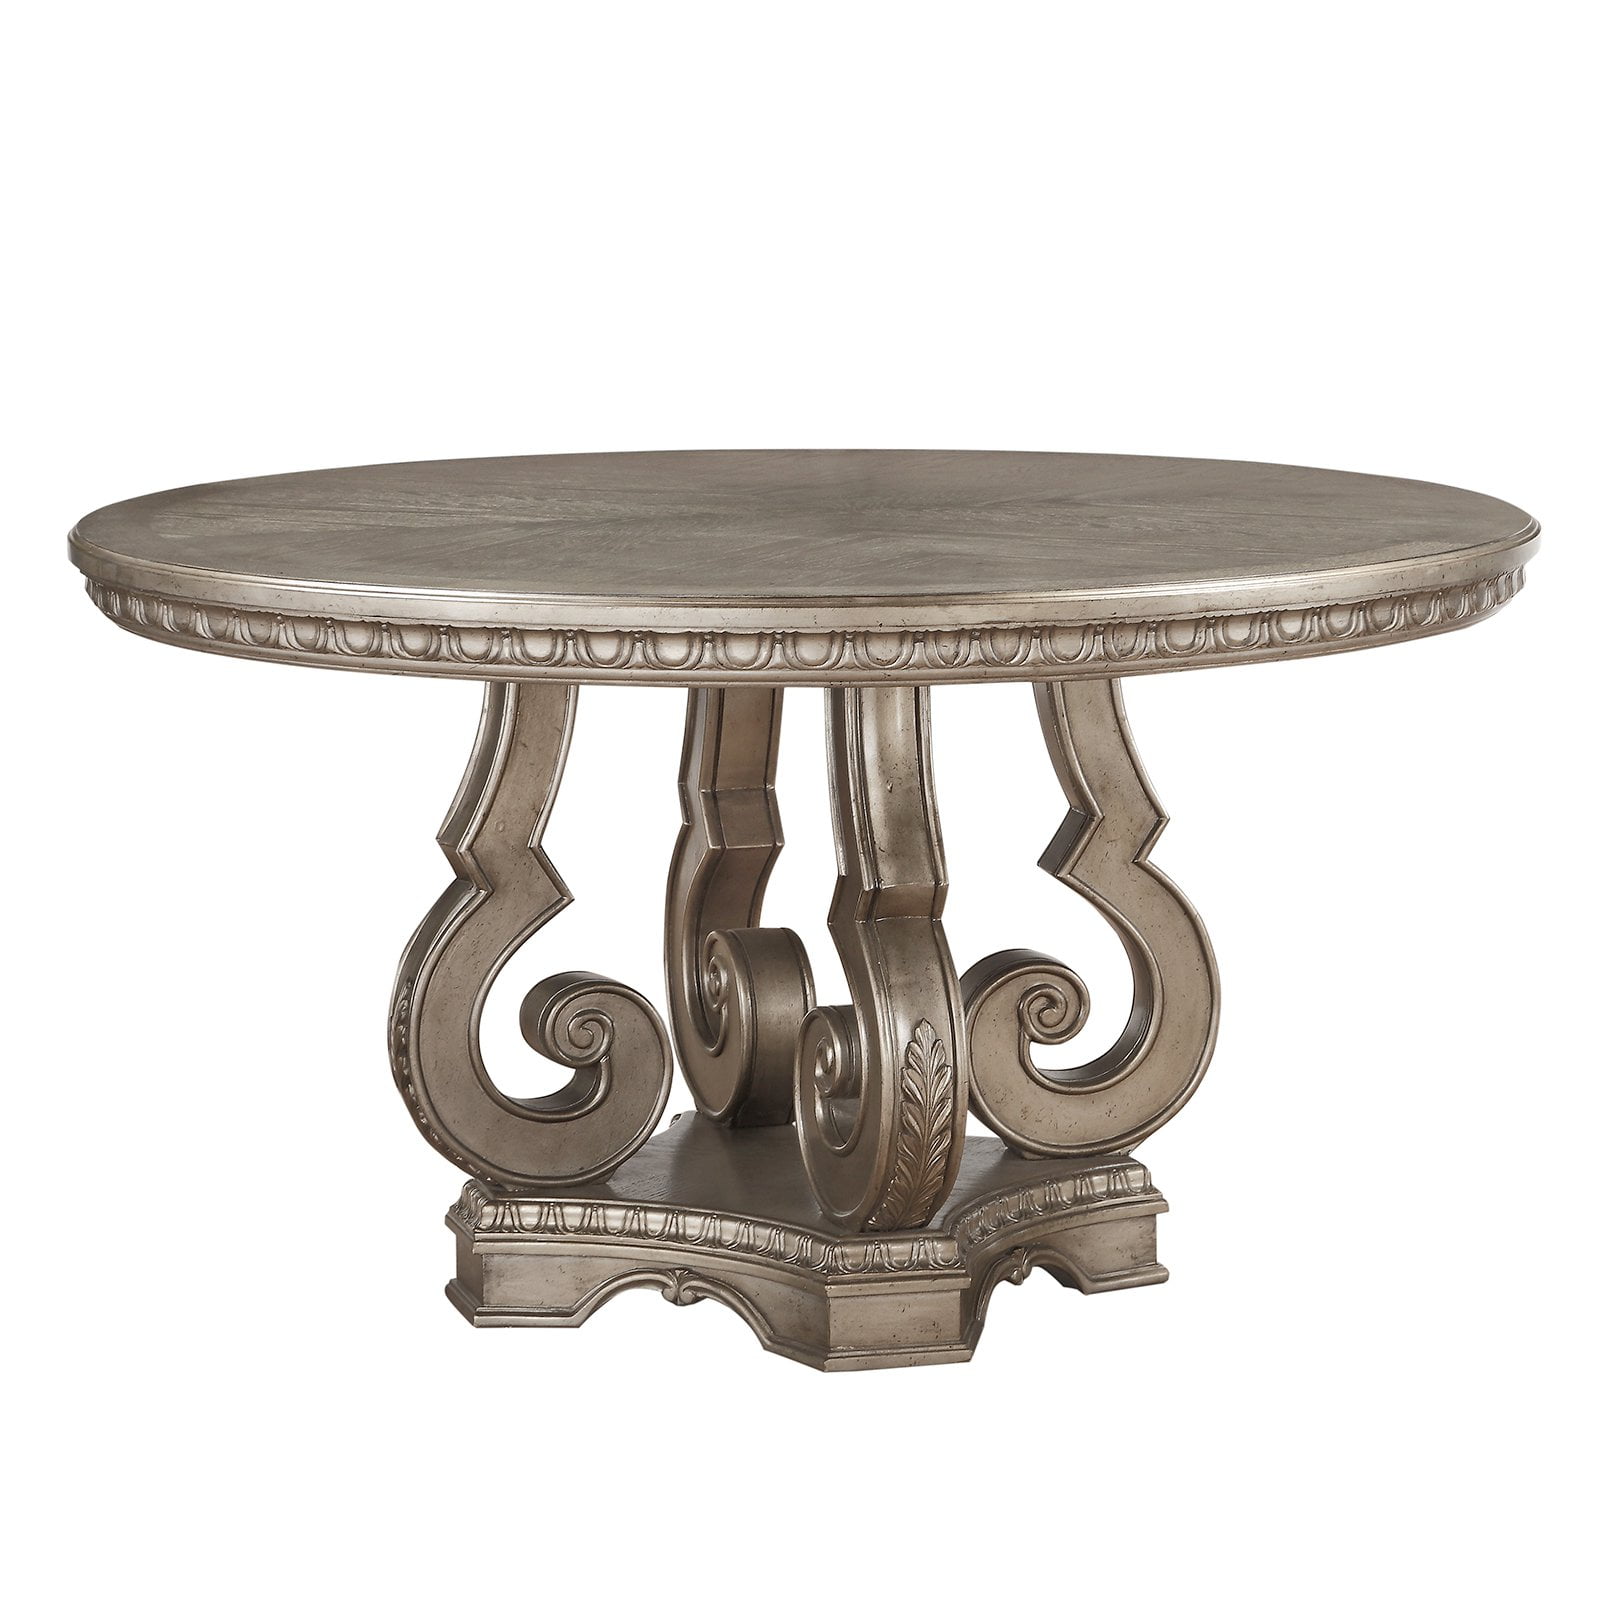 Picture of ACME 66915 Round Northville Dining Table with Single Pedestal - Antique Champagne